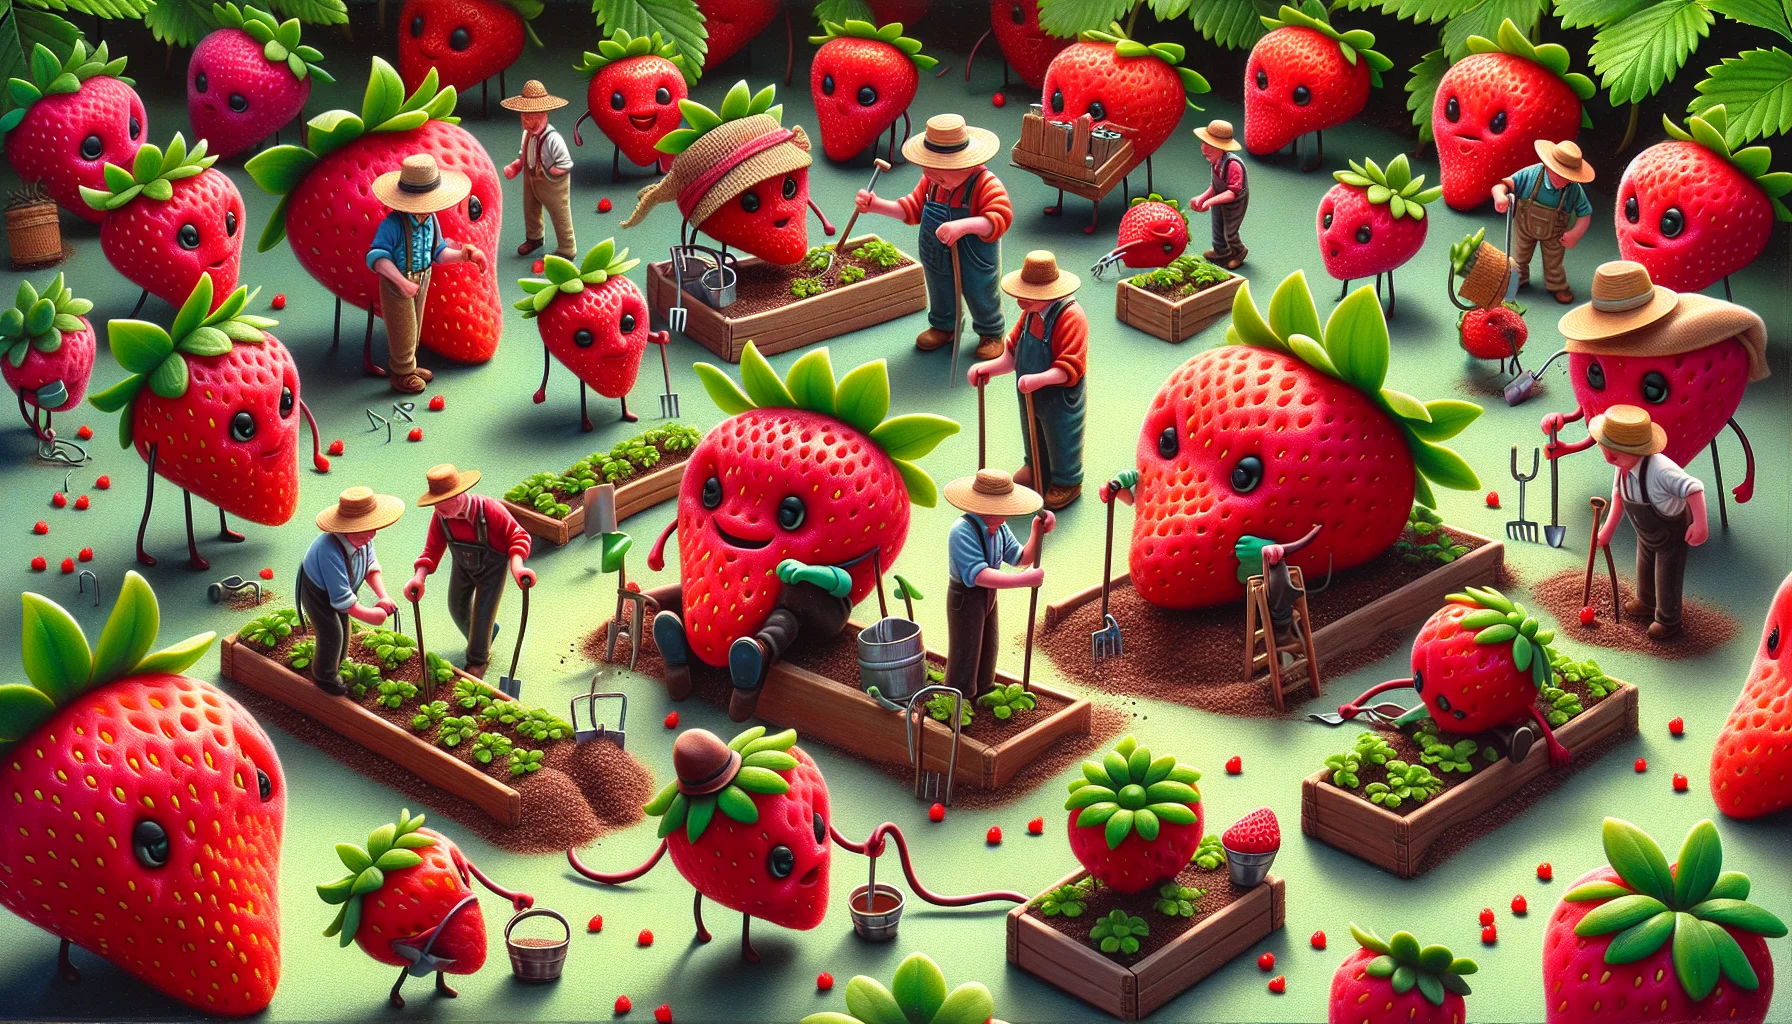 A delightful farming scene showcasing different strawberry species engaging in humorous antics in a garden setting. These tiny characters with their bright red bodies and green leaves act as if they have their own lives. Some can be seen wearing gardening hats, wielding mini tools, while others are energetically throwing seeds around. Display them having small, vivid conversations, alluding to their passion for gardening. This surreal portrayal should emphasize the joy and charm of gardening, encouraging people to take part in this rewarding activity. Please maintain a realistic style with vibrant colors and fine details.